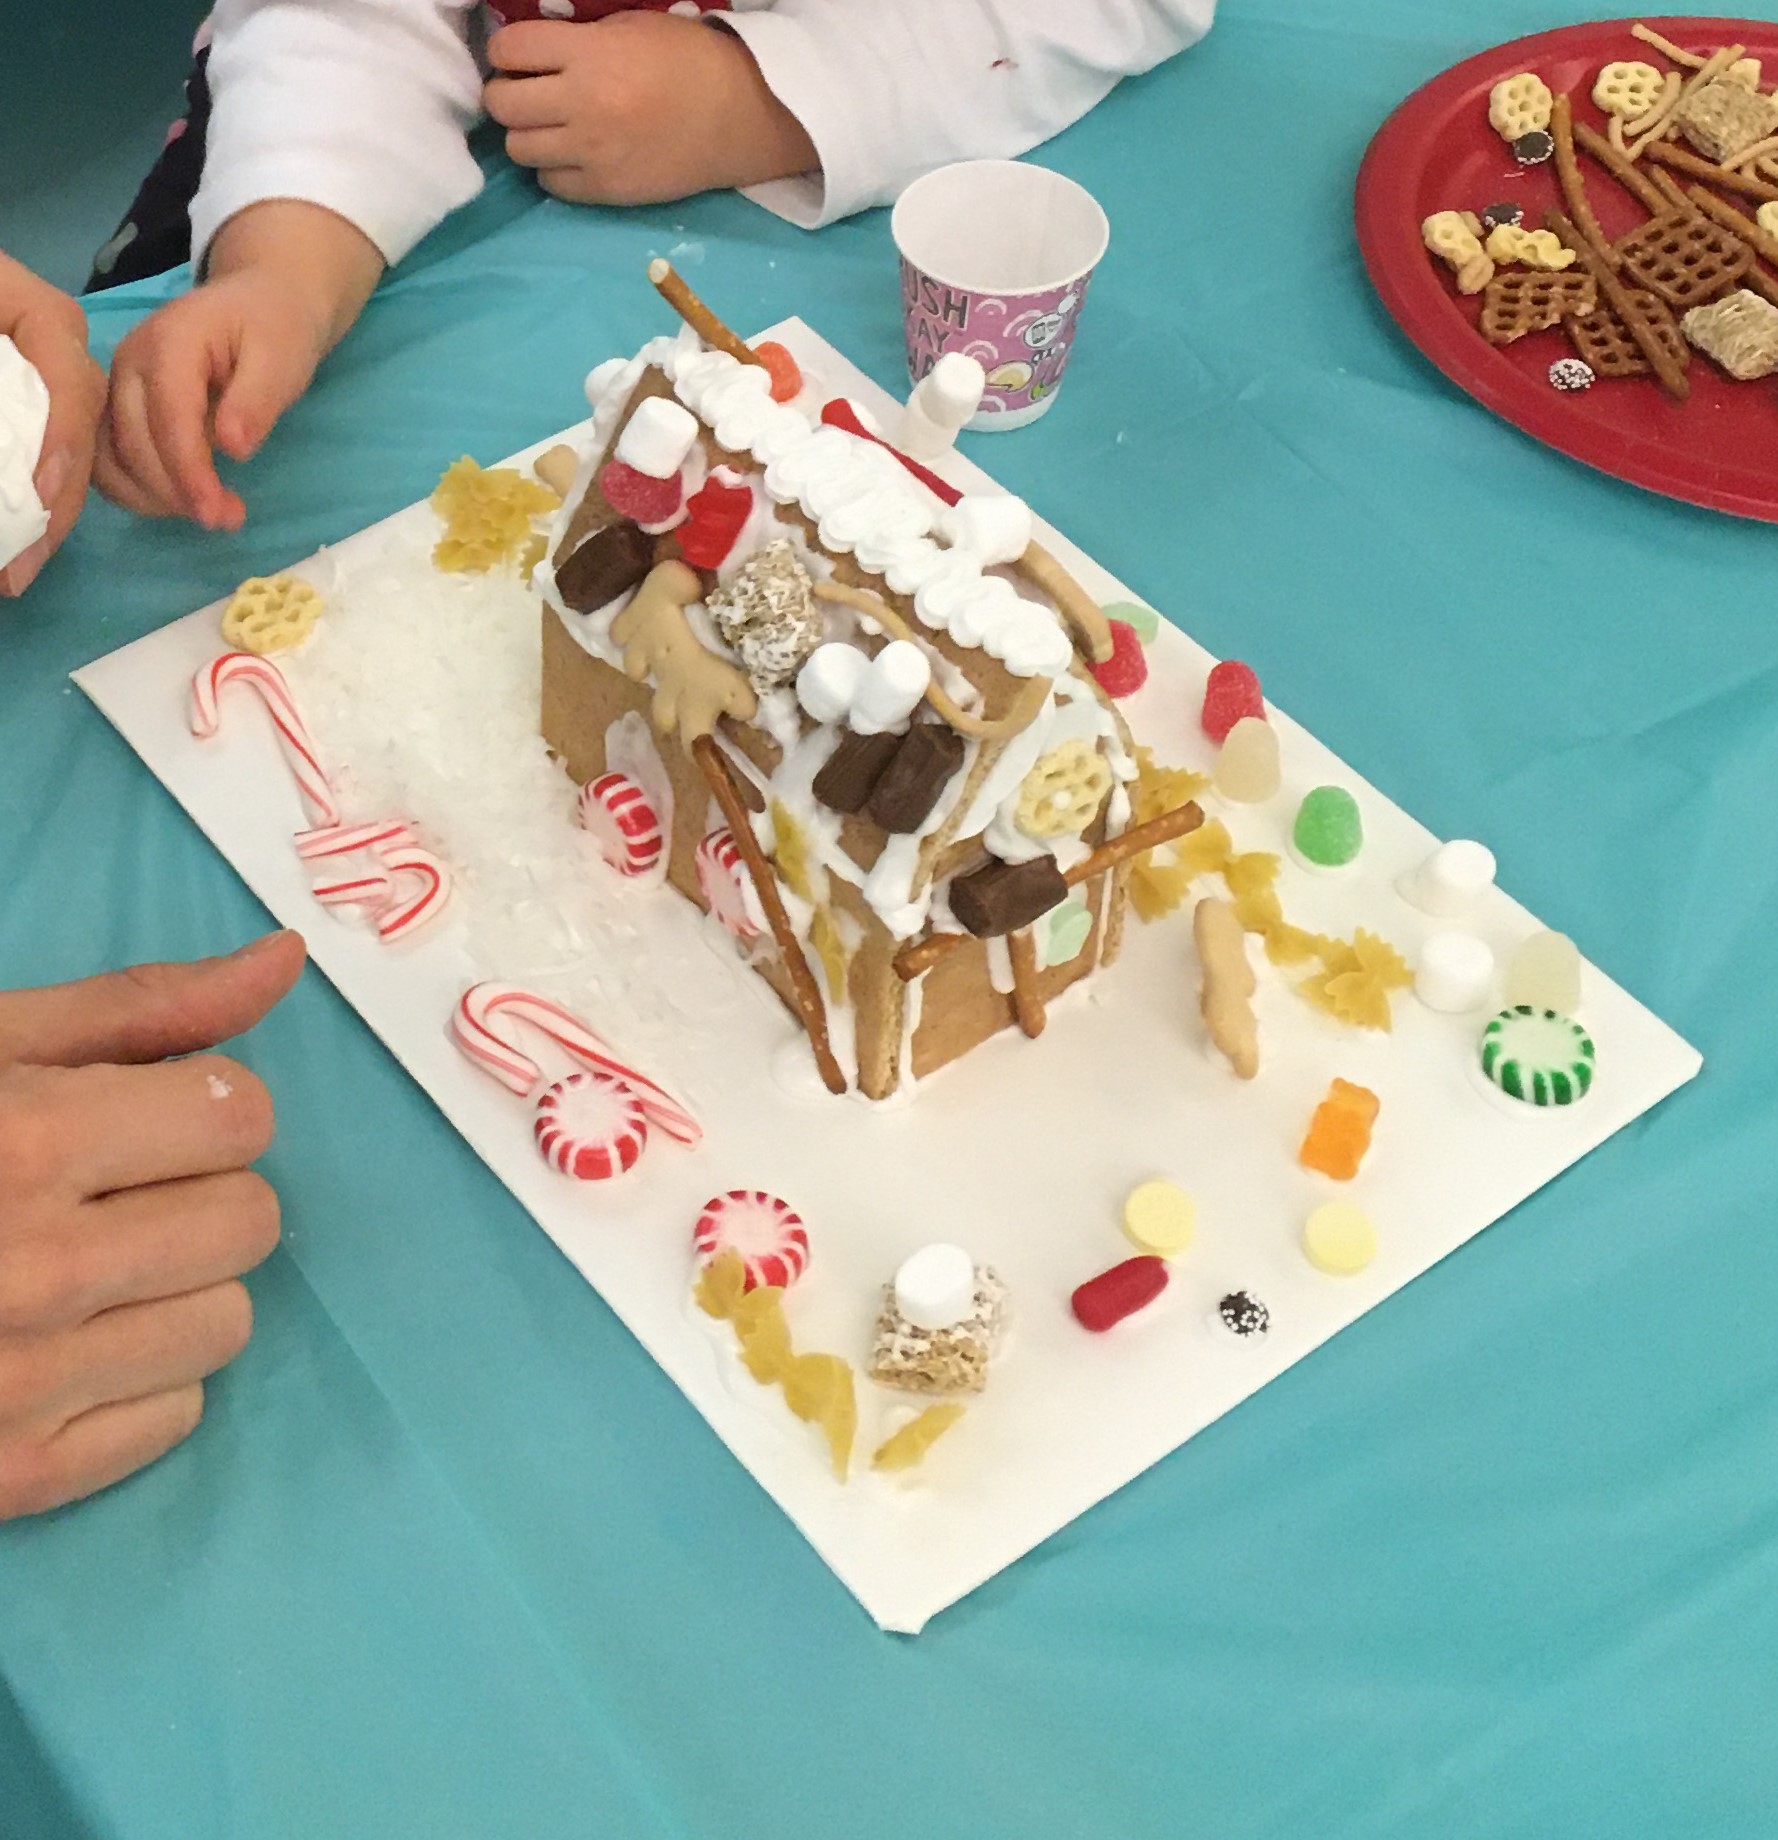 gingerbread house with decorations